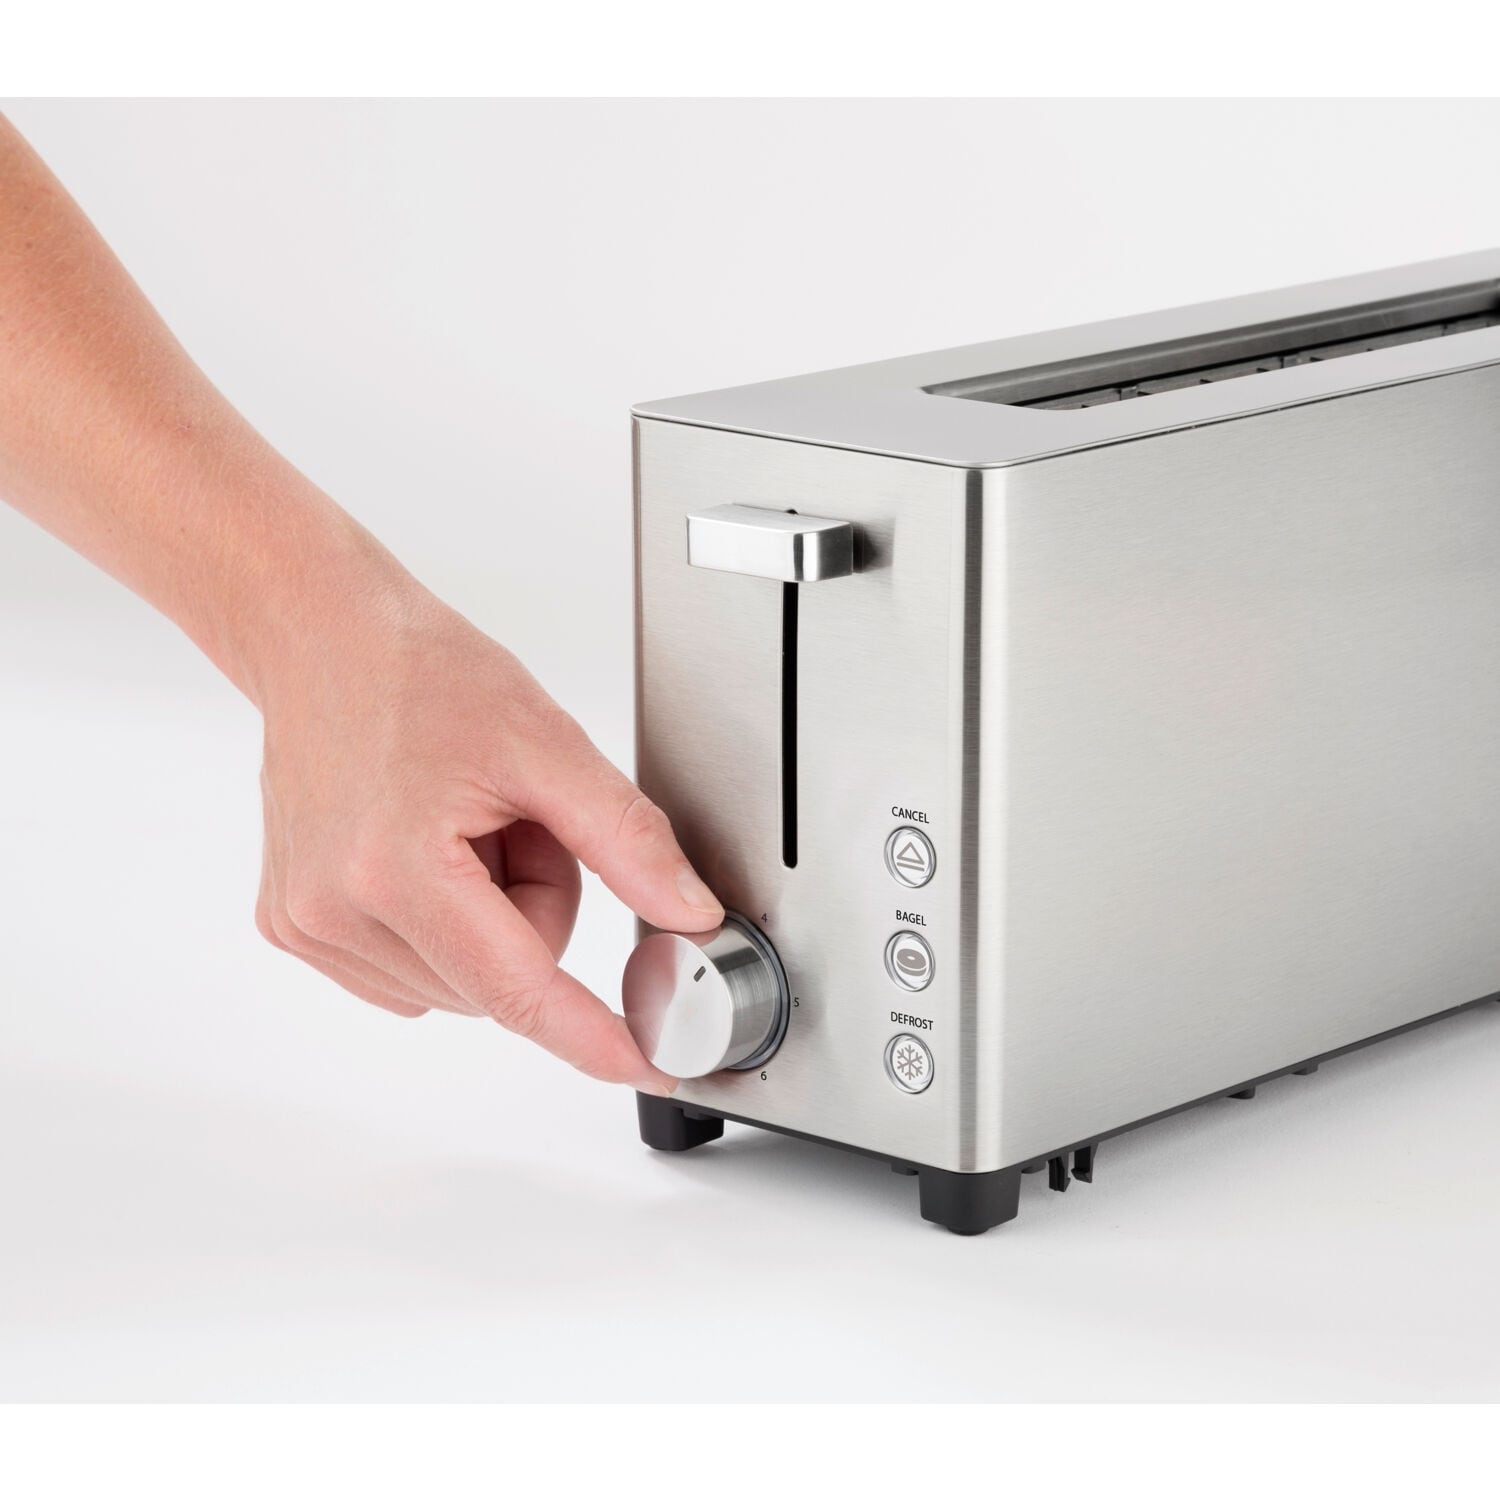 https://ak1.ostkcdn.com/images/products/is/images/direct/314b06196975af82b6791b7dce00c53f329a3fd8/Two-Slice-Wide-Slot-Toaster%2C-Stainless-Steel.jpg